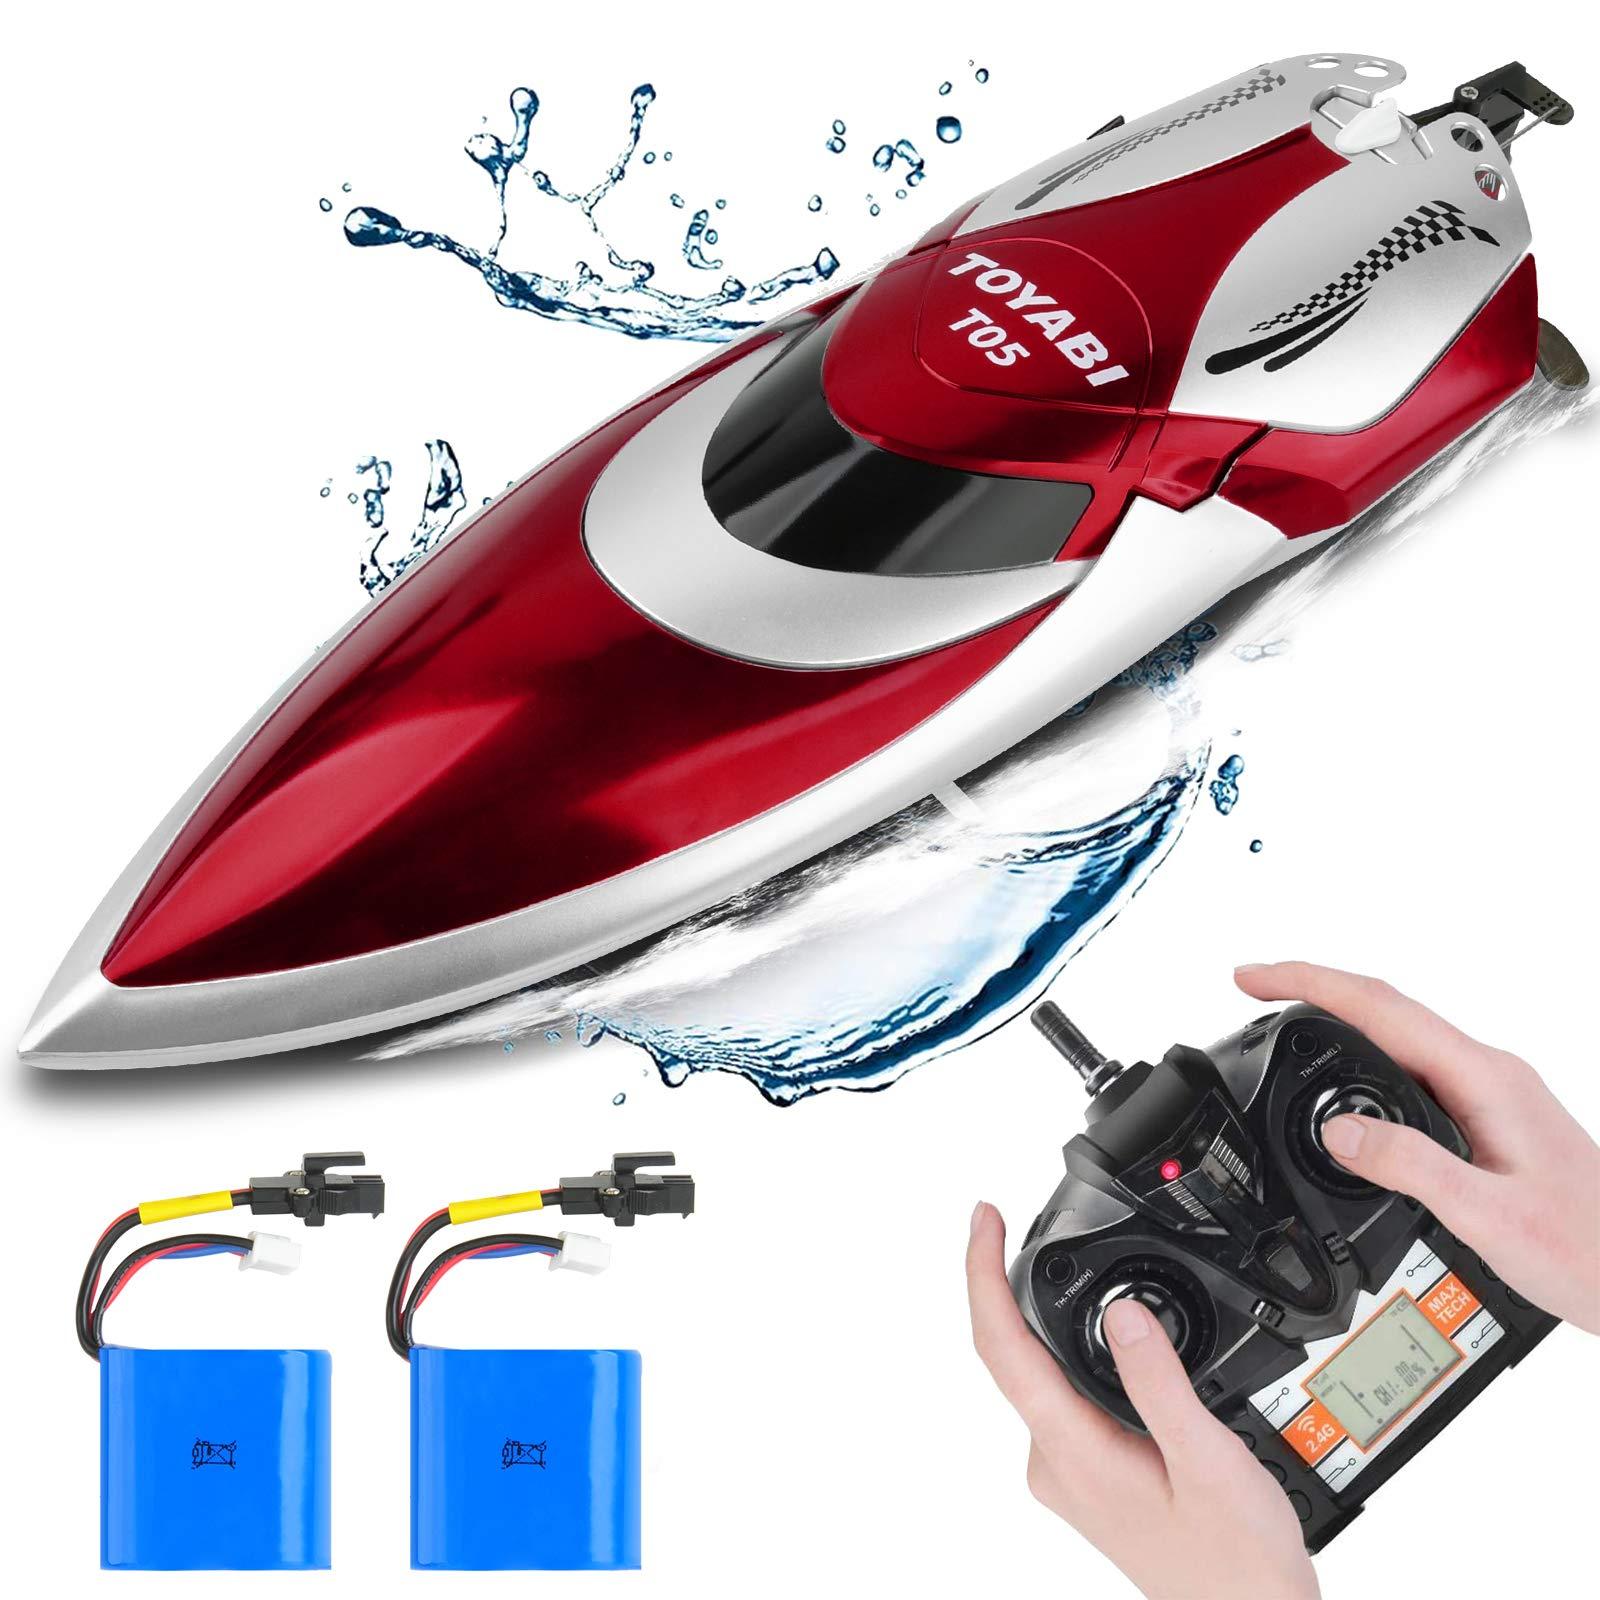 Gizmovine Rc Boat T03: Effortless control with T03's responsive remote